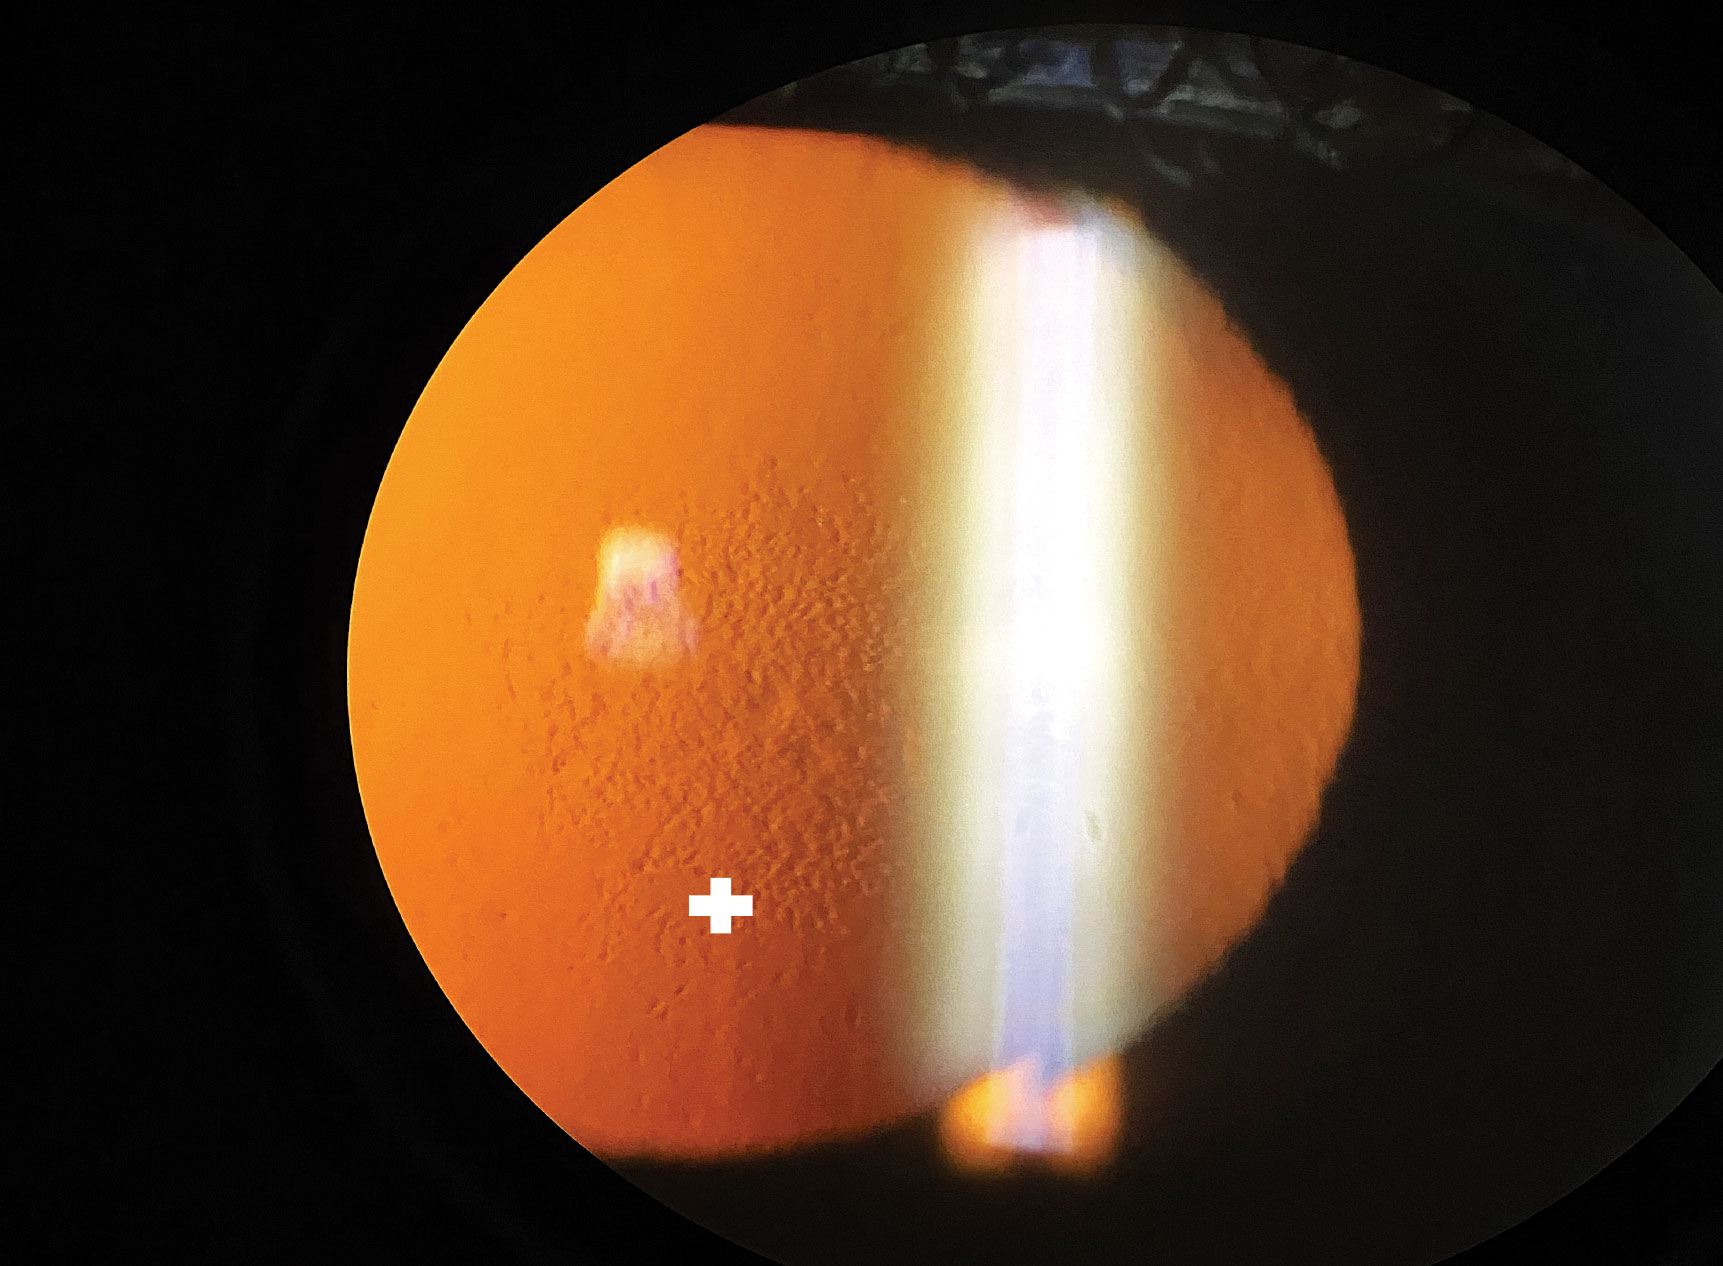 Slit lamp imaging using an iPhone X of central guttata in a patient with Fuchs’ endothelial dystrophy with lesions viewed in retroillumination (plus sign).